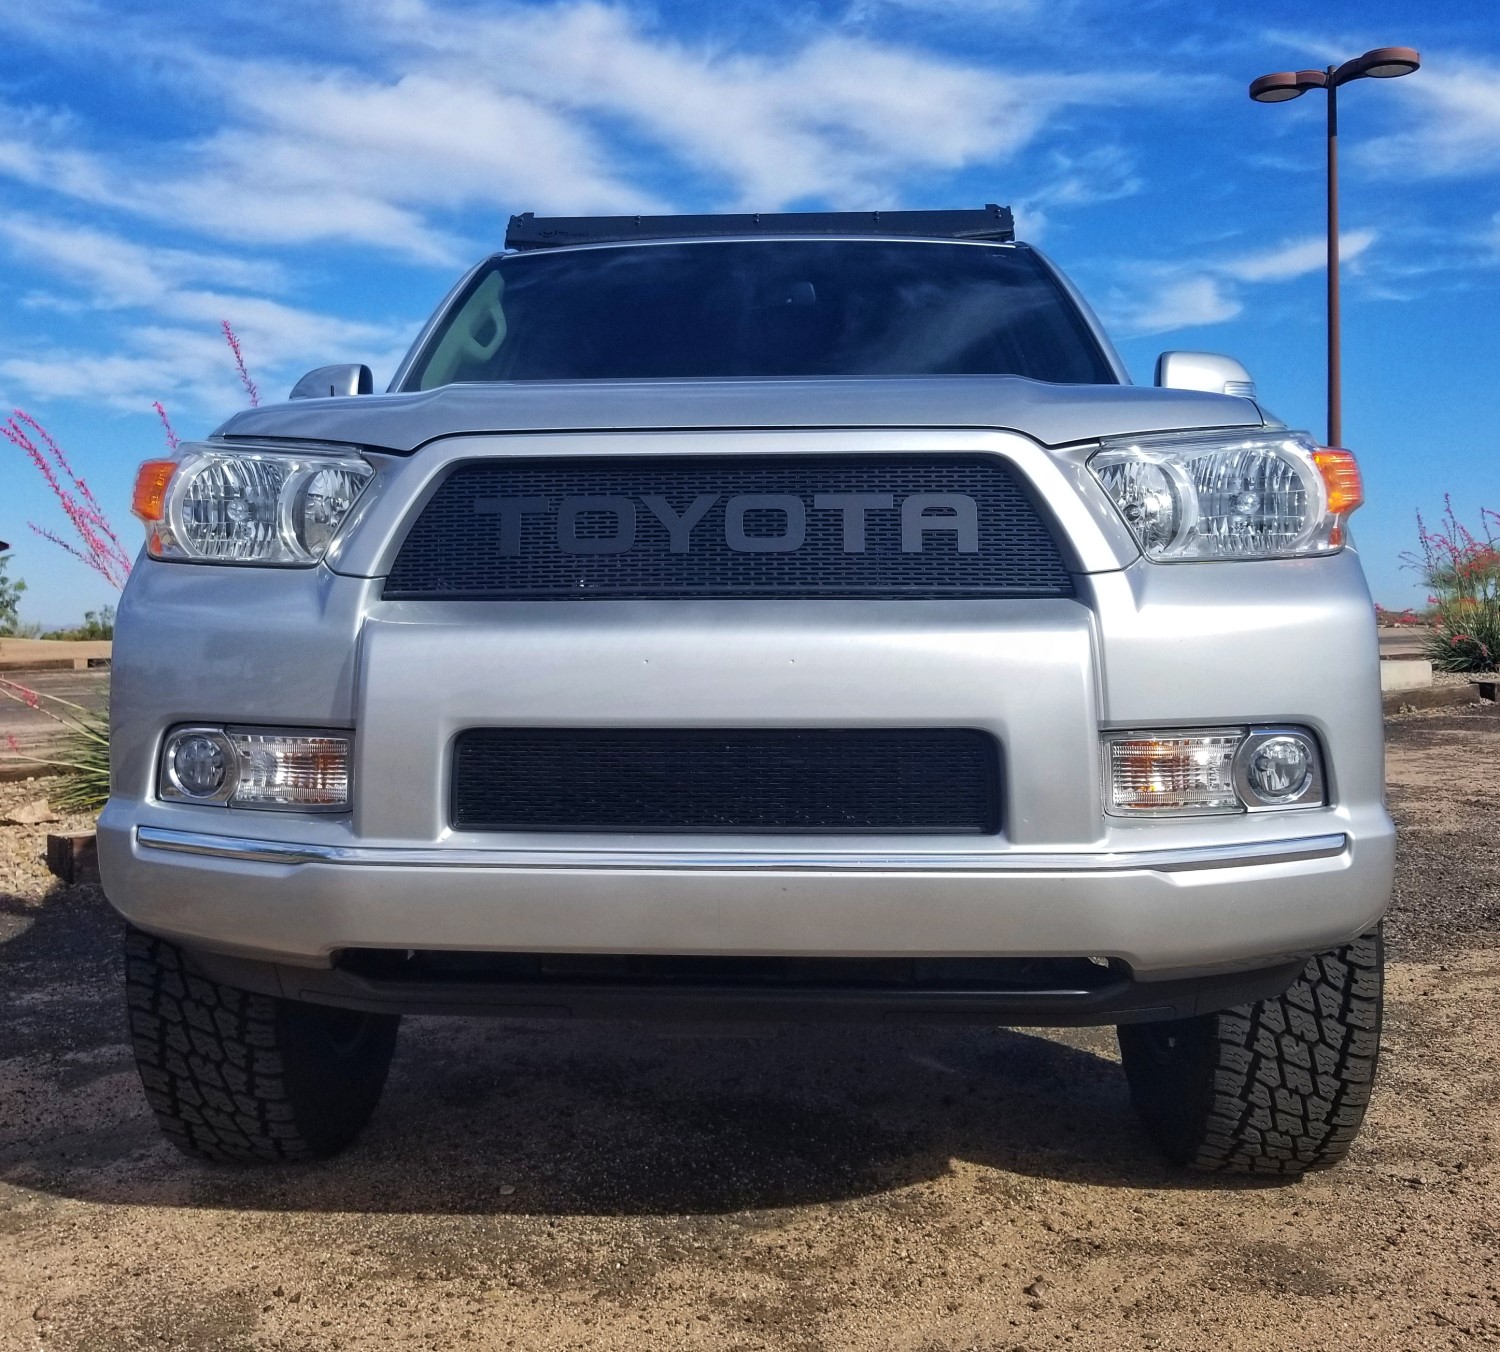 2010-13 Toyota 4Runner Customization: Personalize Your Grille with Custom Letters and a Black Slotted Design